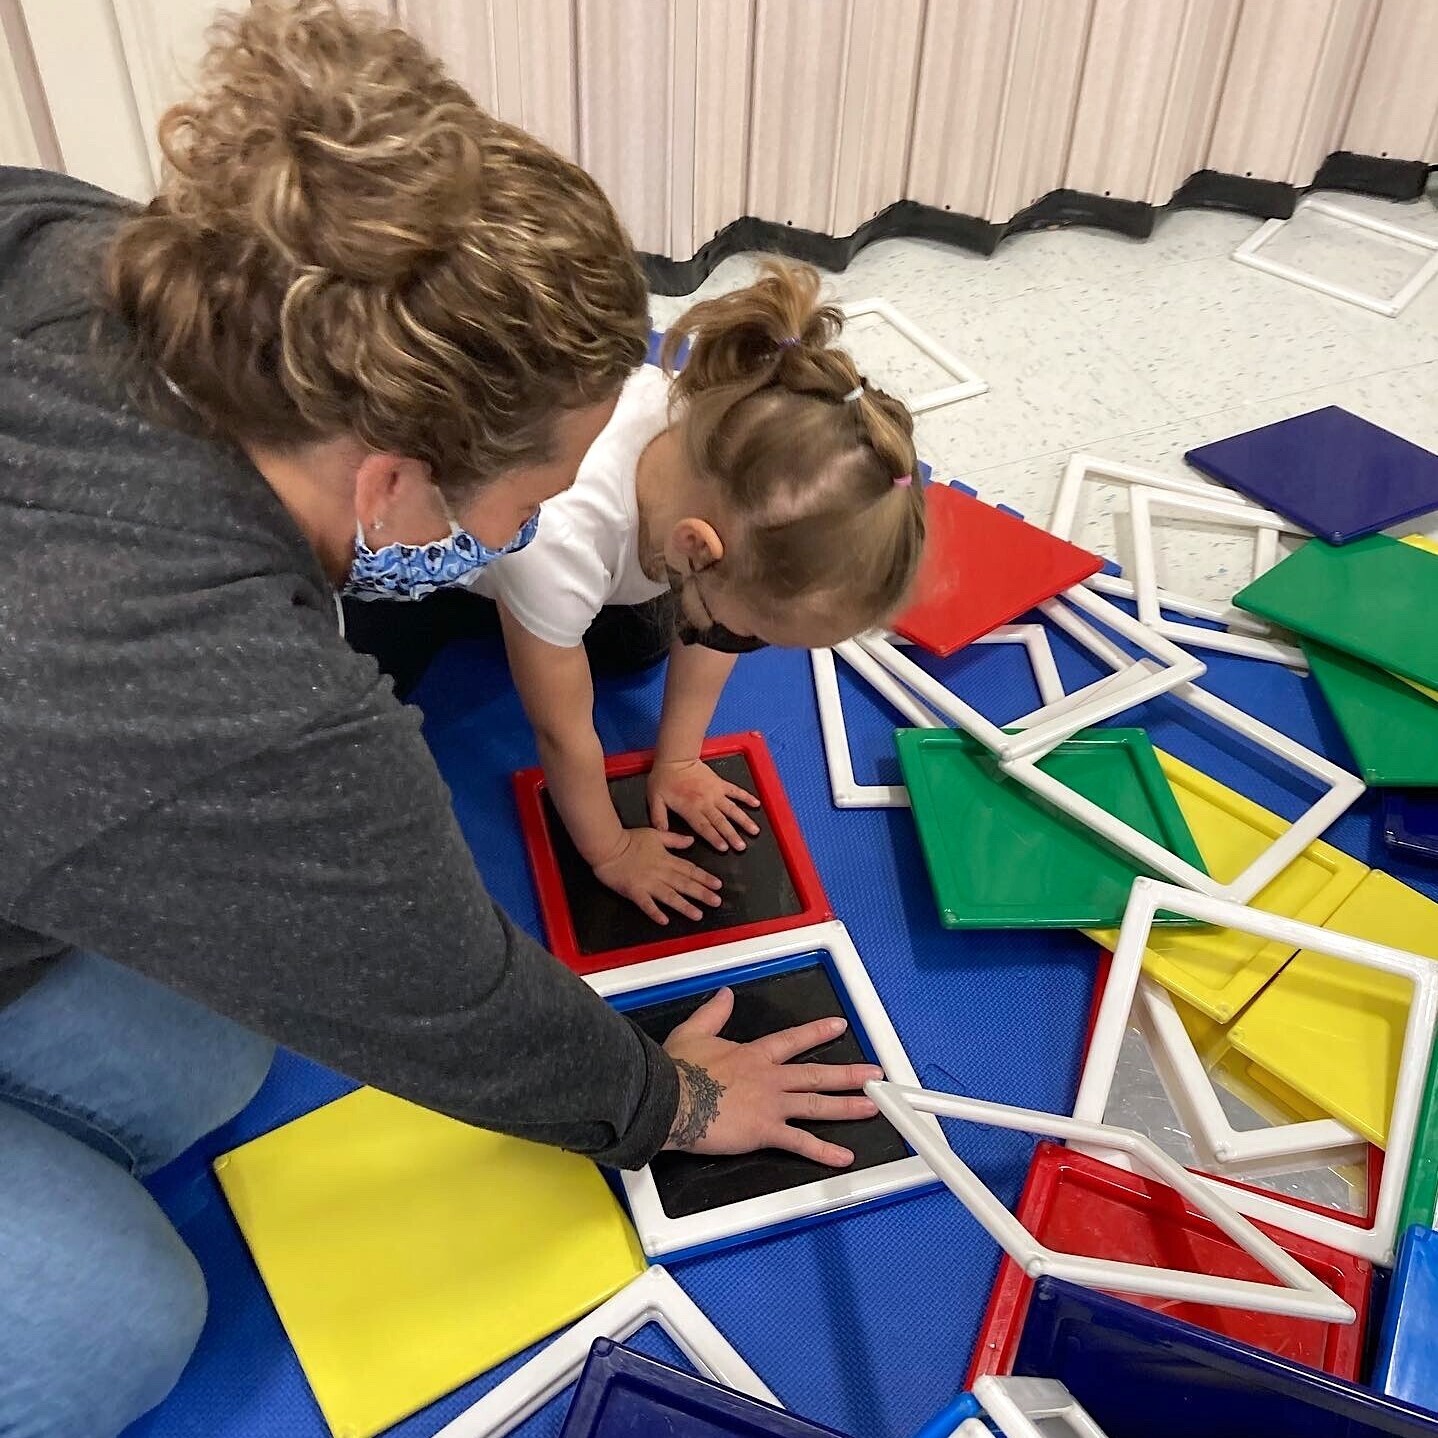 Adult and child placing hands on square toys